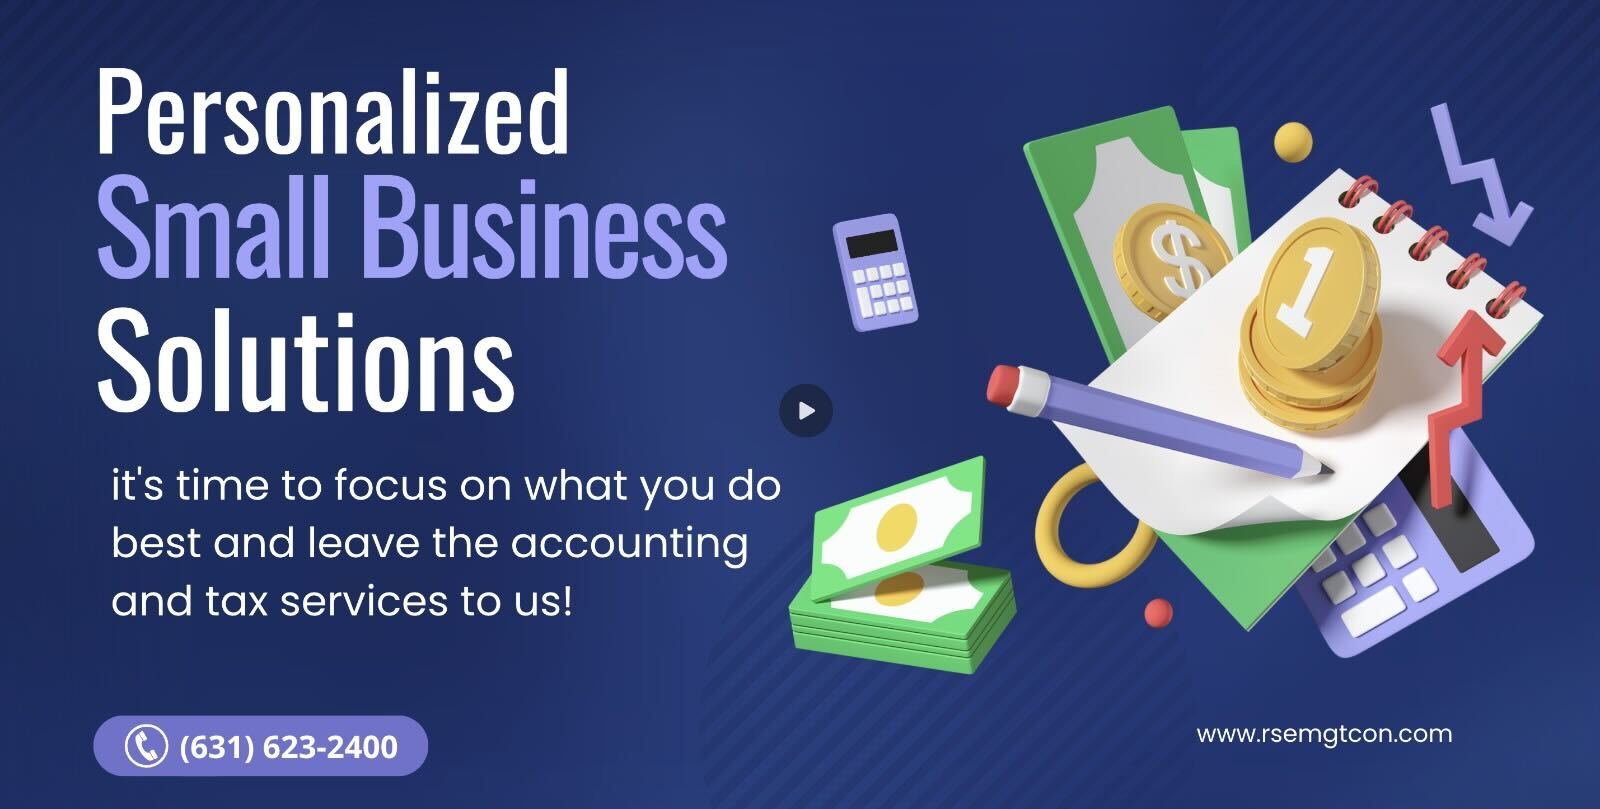 Personalized Small Business Solutions